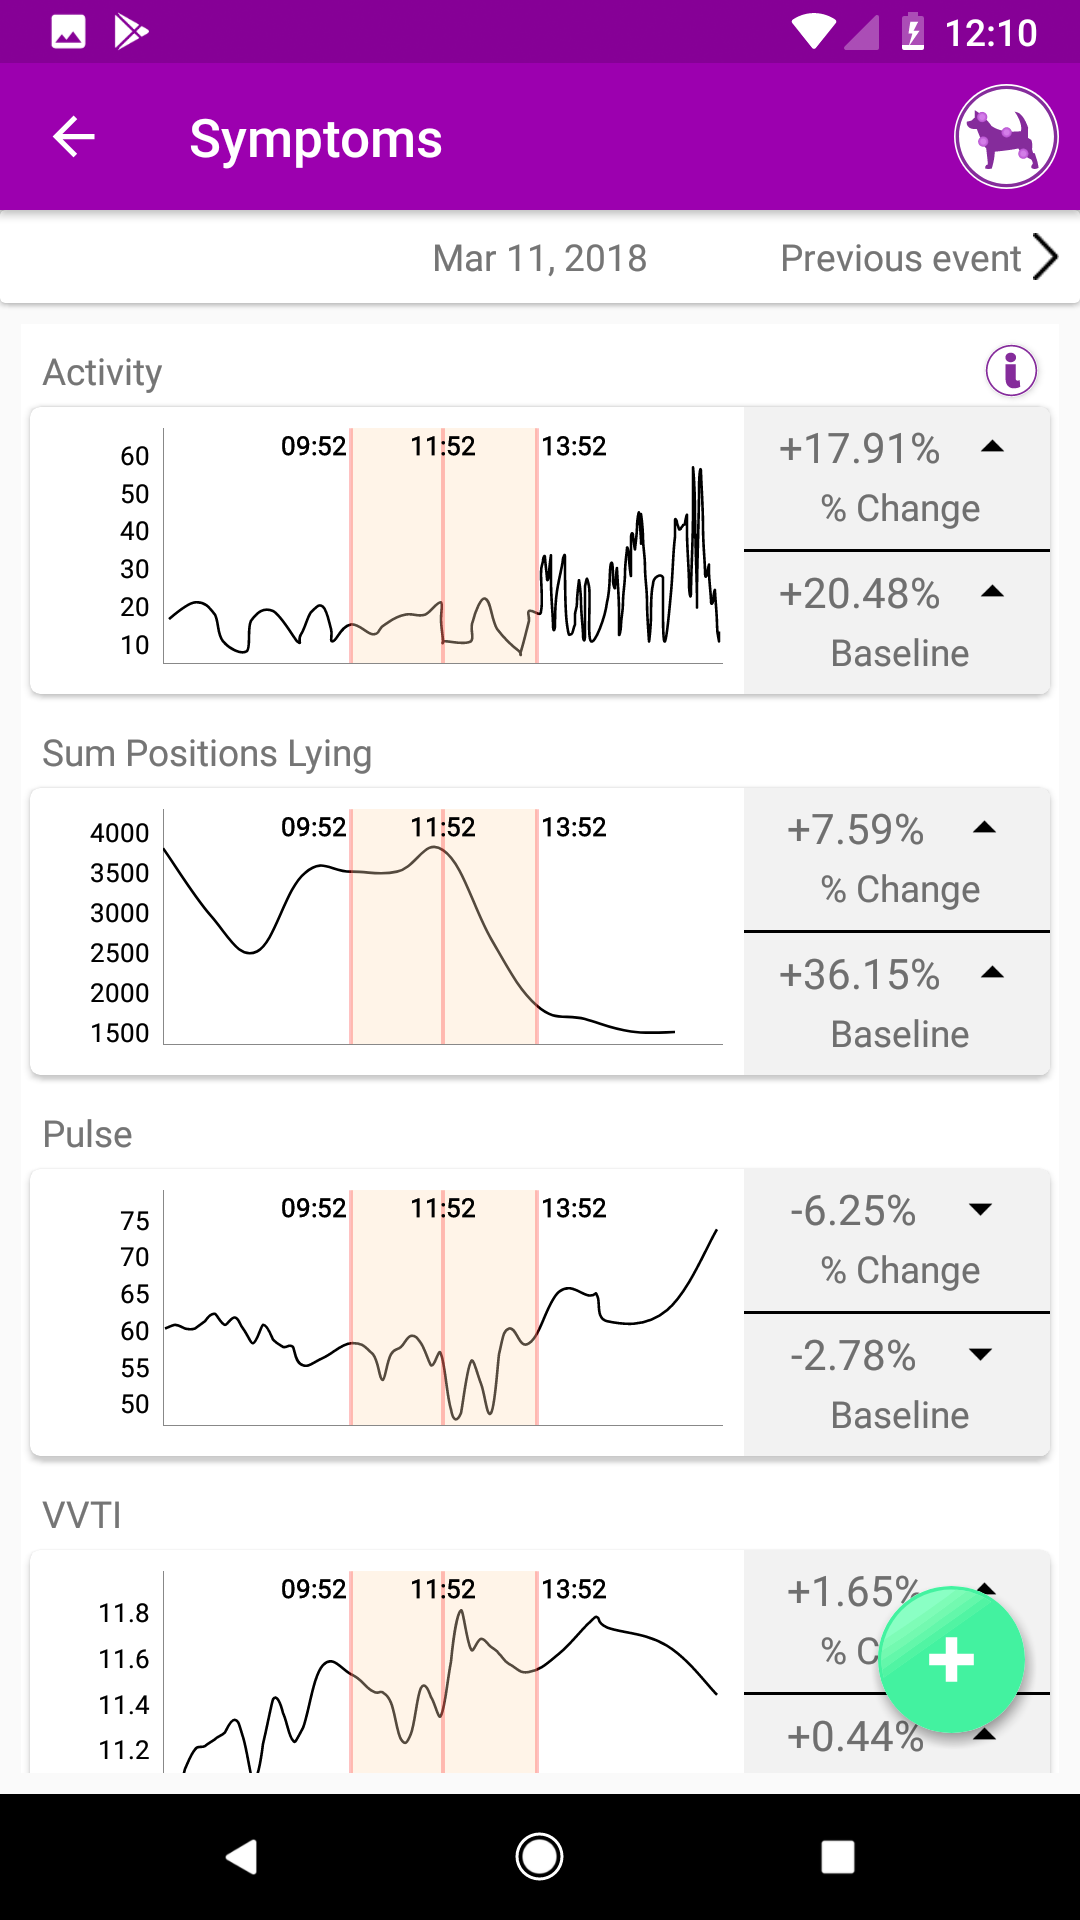 Biometric Event Charts in the PetPace Mobile App